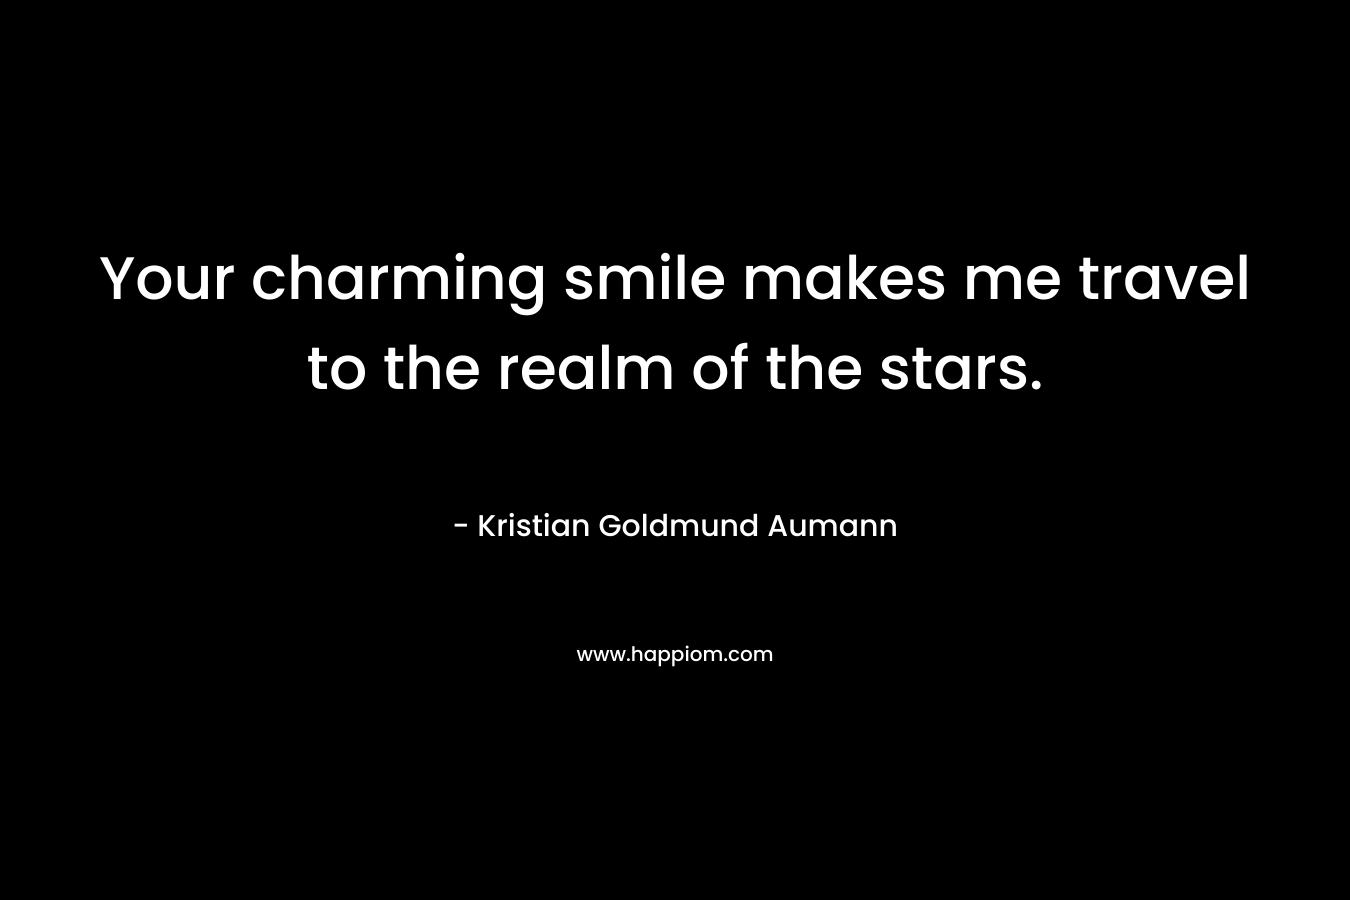 Your charming smile makes me travel to the realm of the stars. – Kristian Goldmund Aumann